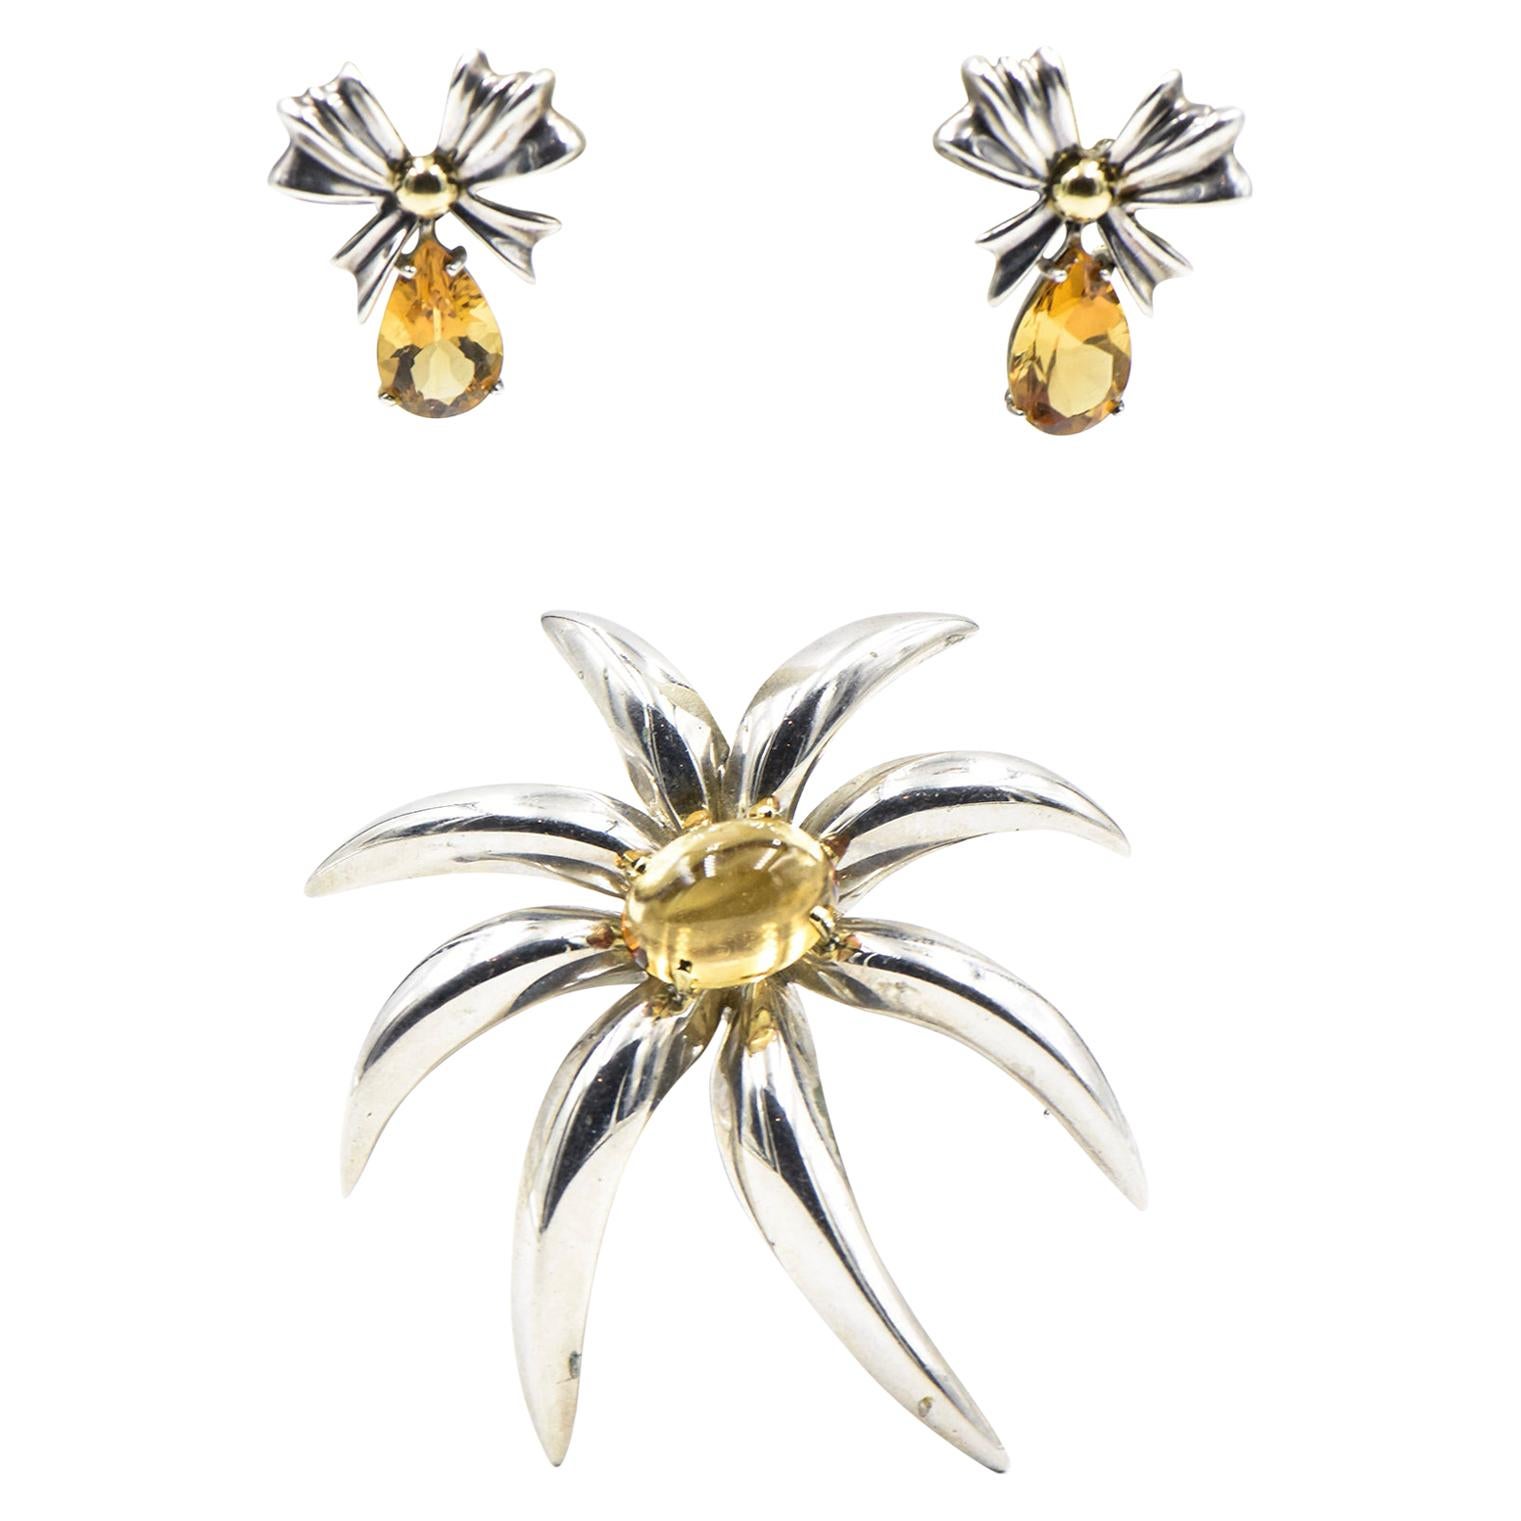 Tiffany & Co. Citrine Sterling Silver Gold Fireworks Brooch and Bow Earrings